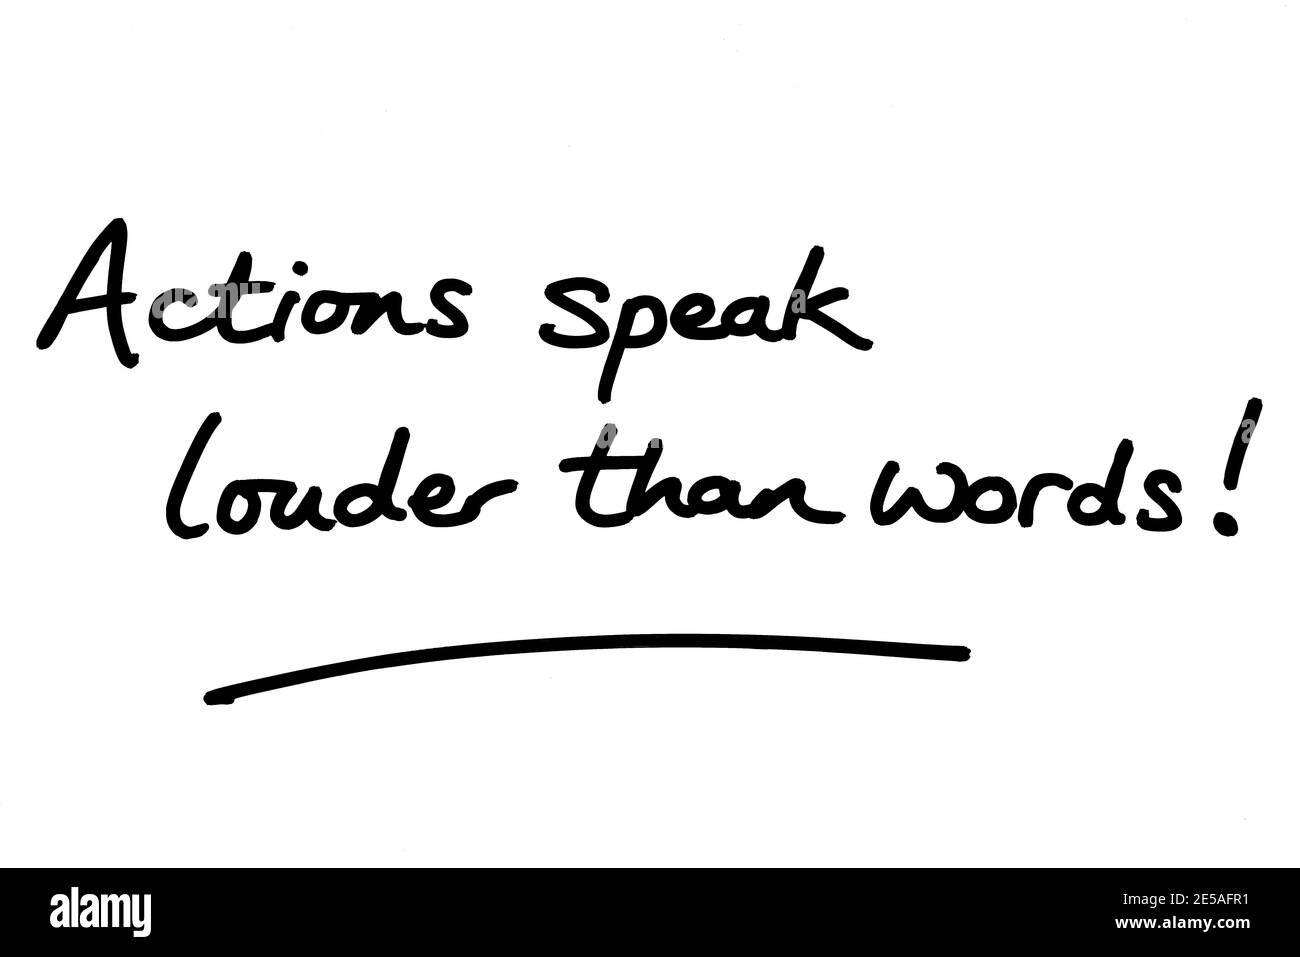 Actions speak louder than words! handwritten on a white background. Stock Photo